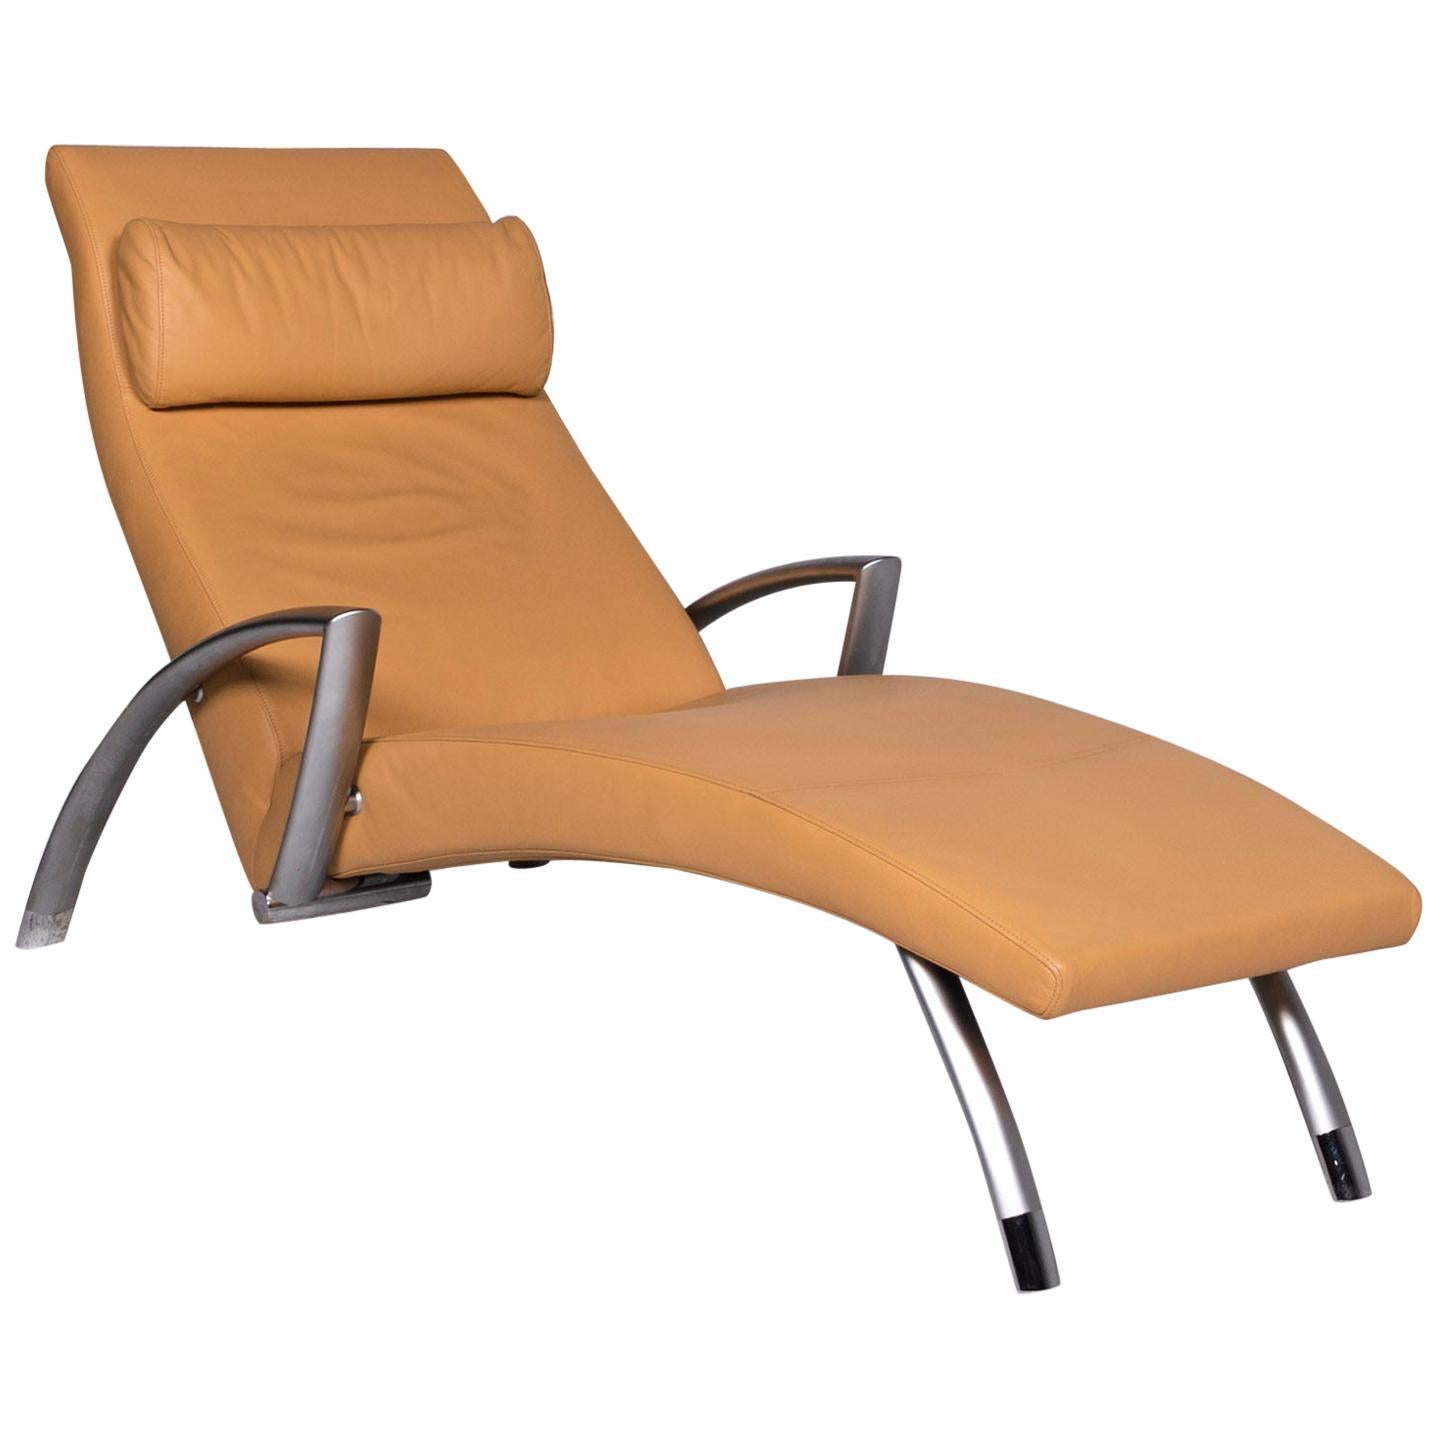 Rolf Benz 2600 Leather Lounger Yellow Relax